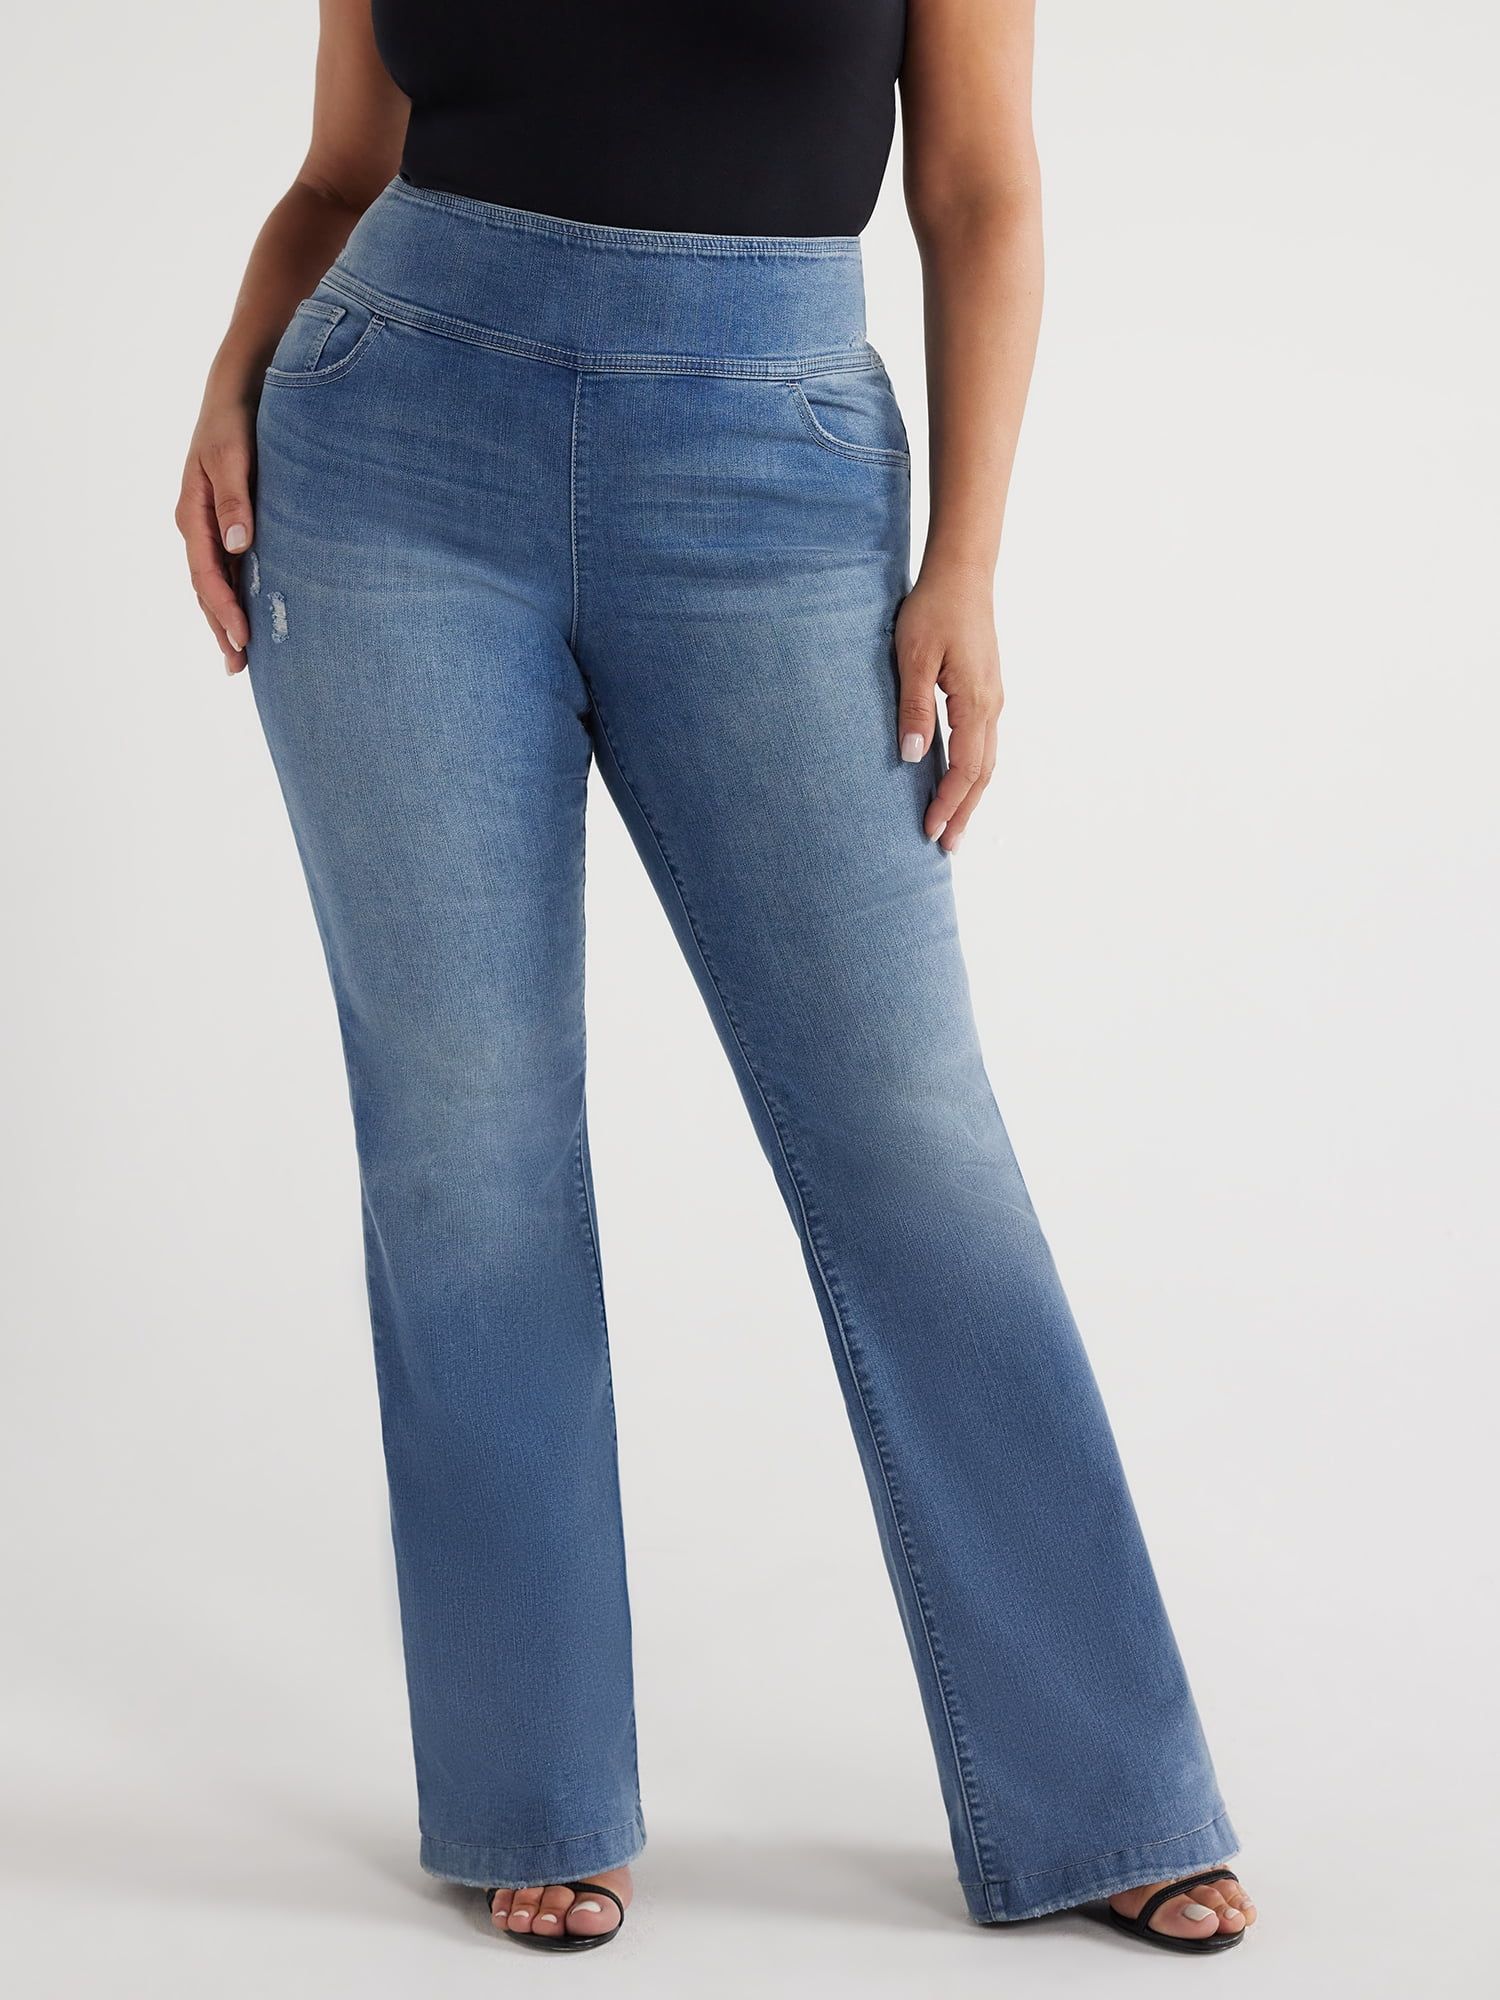 Sofia Jeans Women's Plus Size Melisa Flare High Rise Pull On Jeans, 32.5" Inseam, Sizes 14W-28W | Walmart (US)